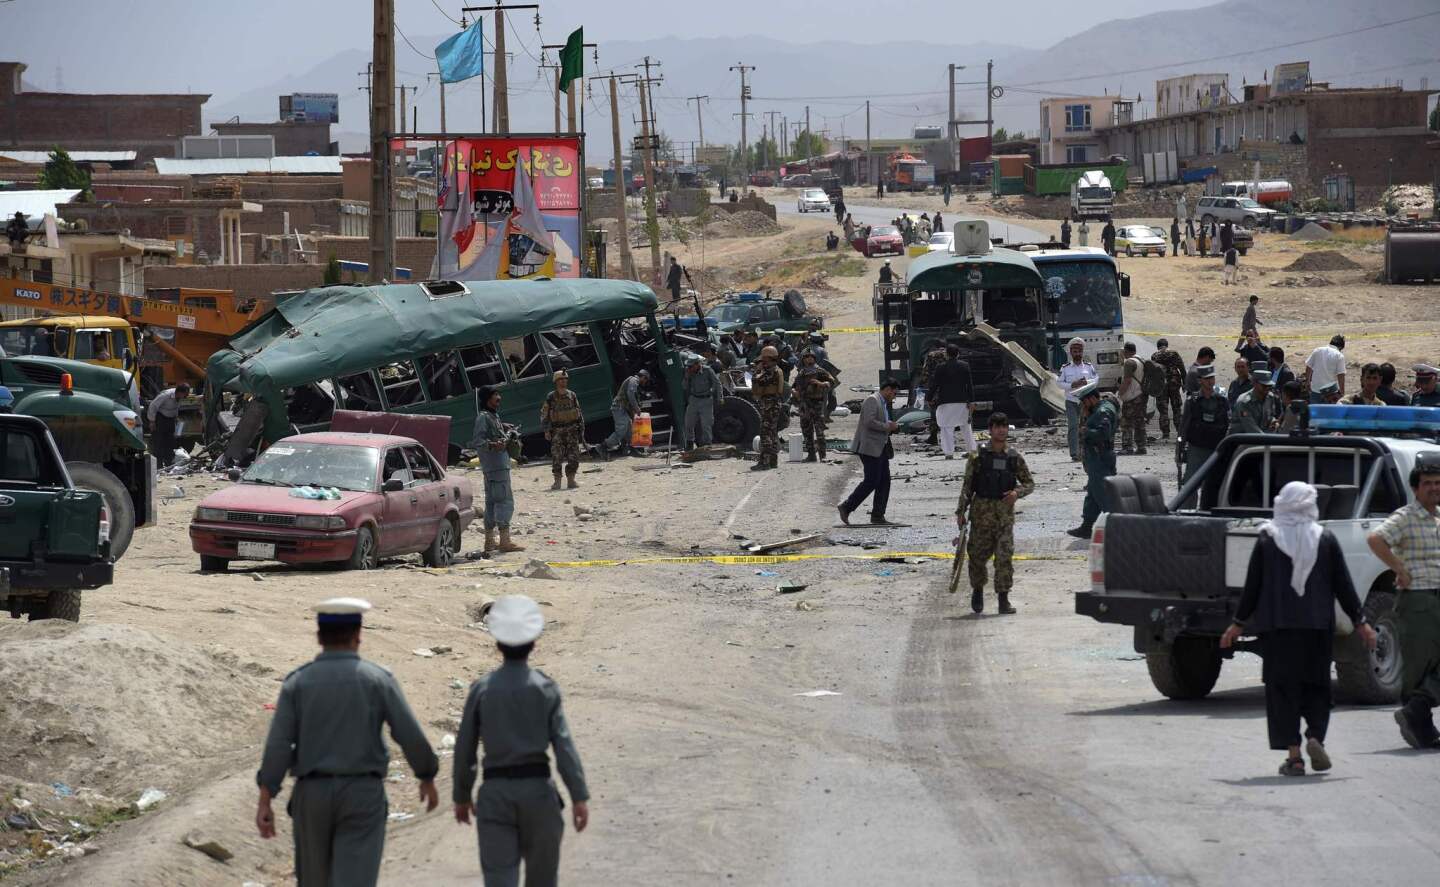 Taliban suicide bombers attack buses filled with police cadets in Kabul